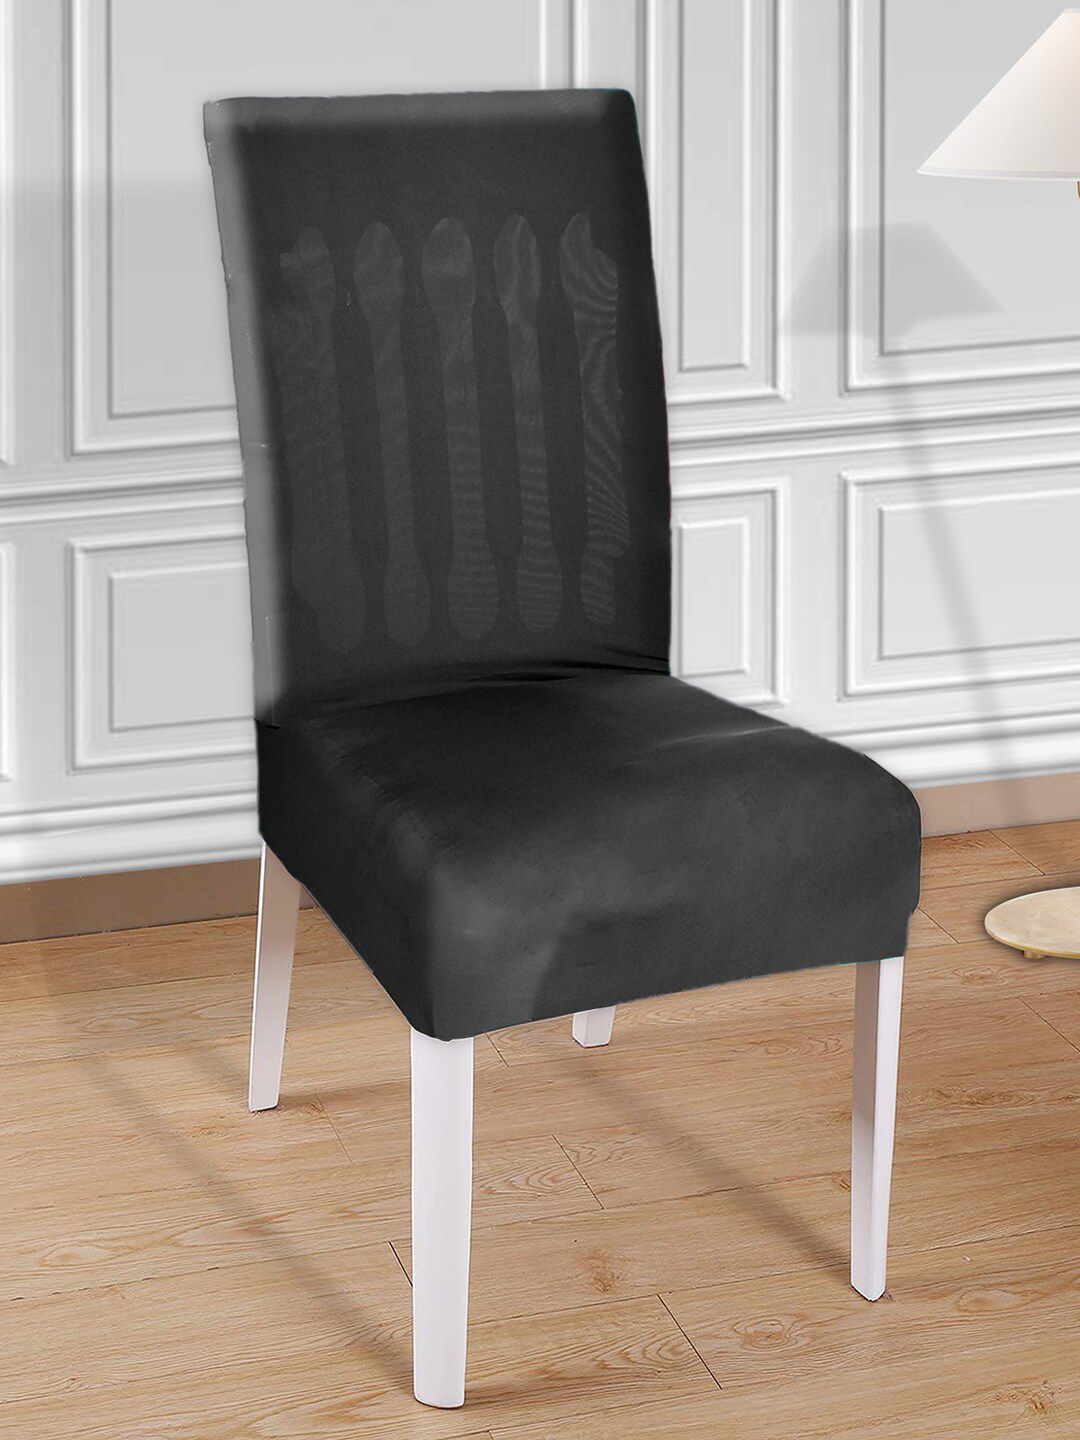 Kuber Industries Set Of 2 Black Solid Chair Covers Price in India